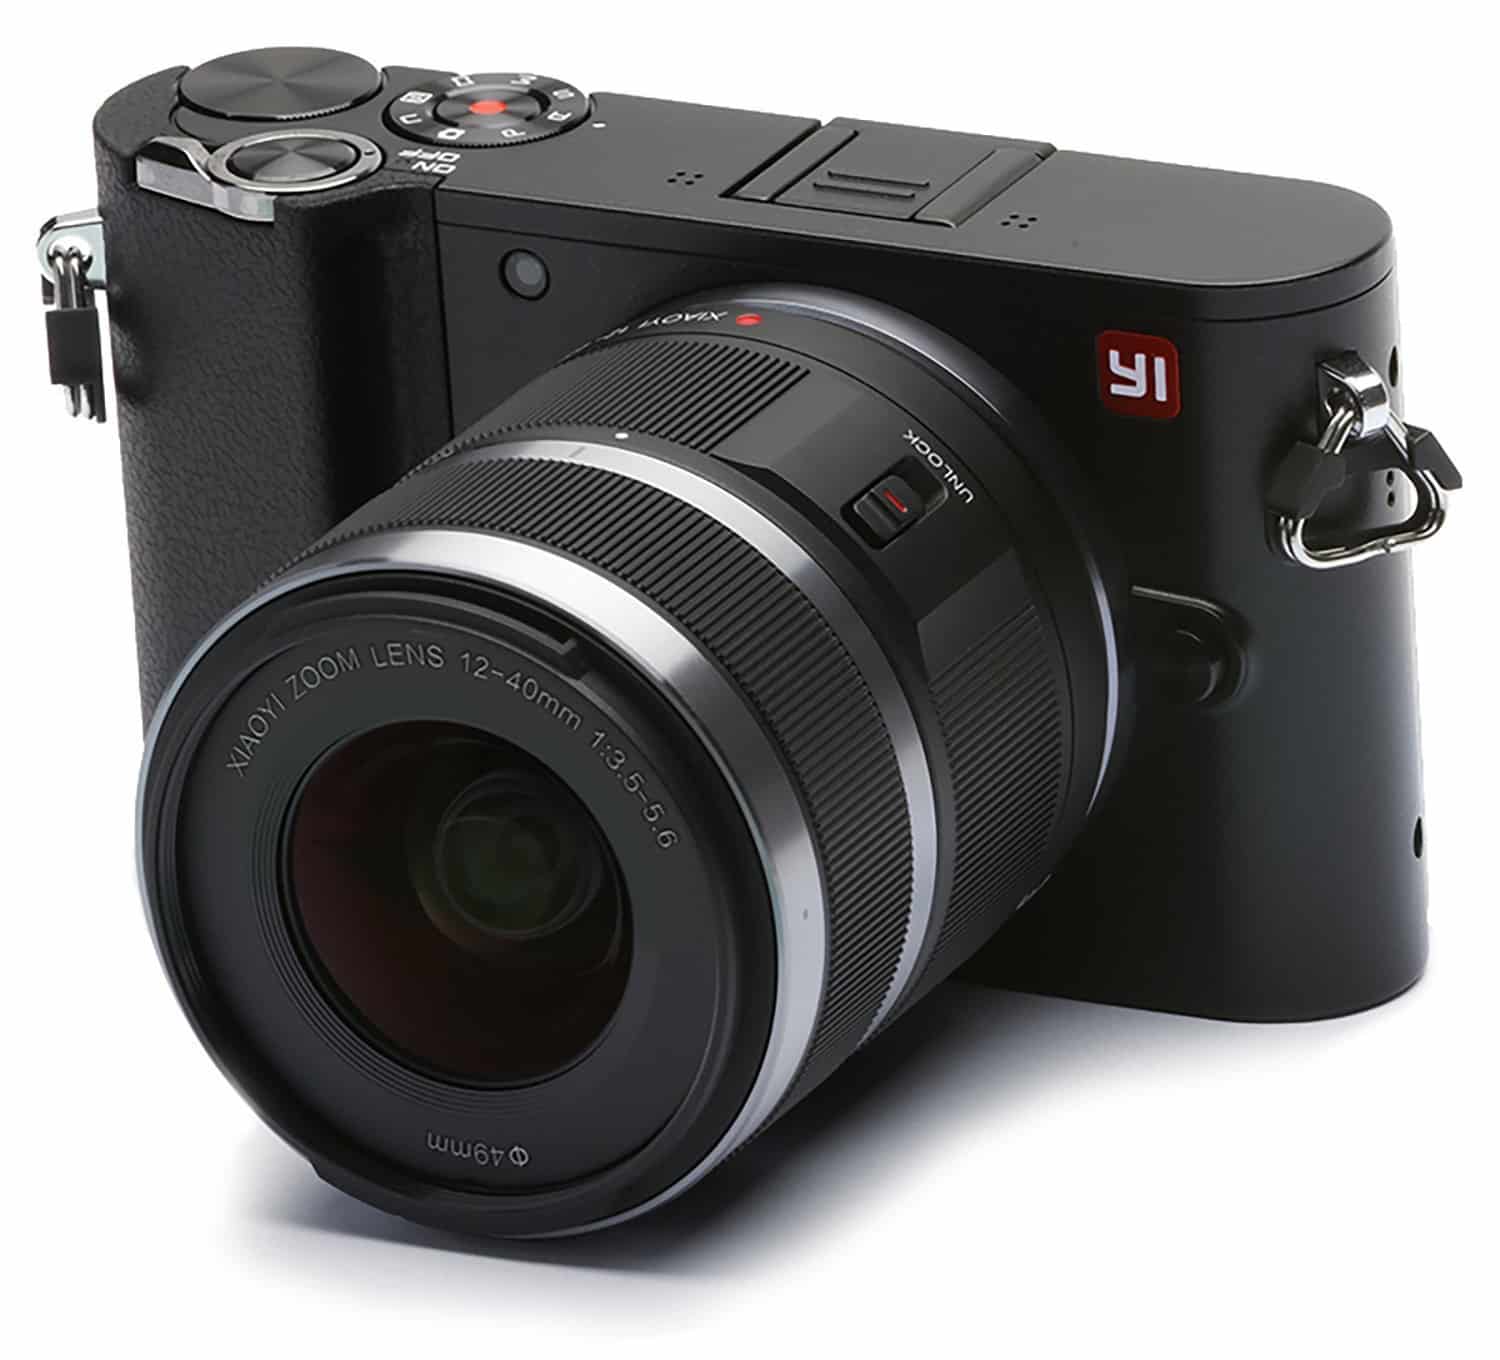 A front look at the Ti M1 mirrorless camera with lens.